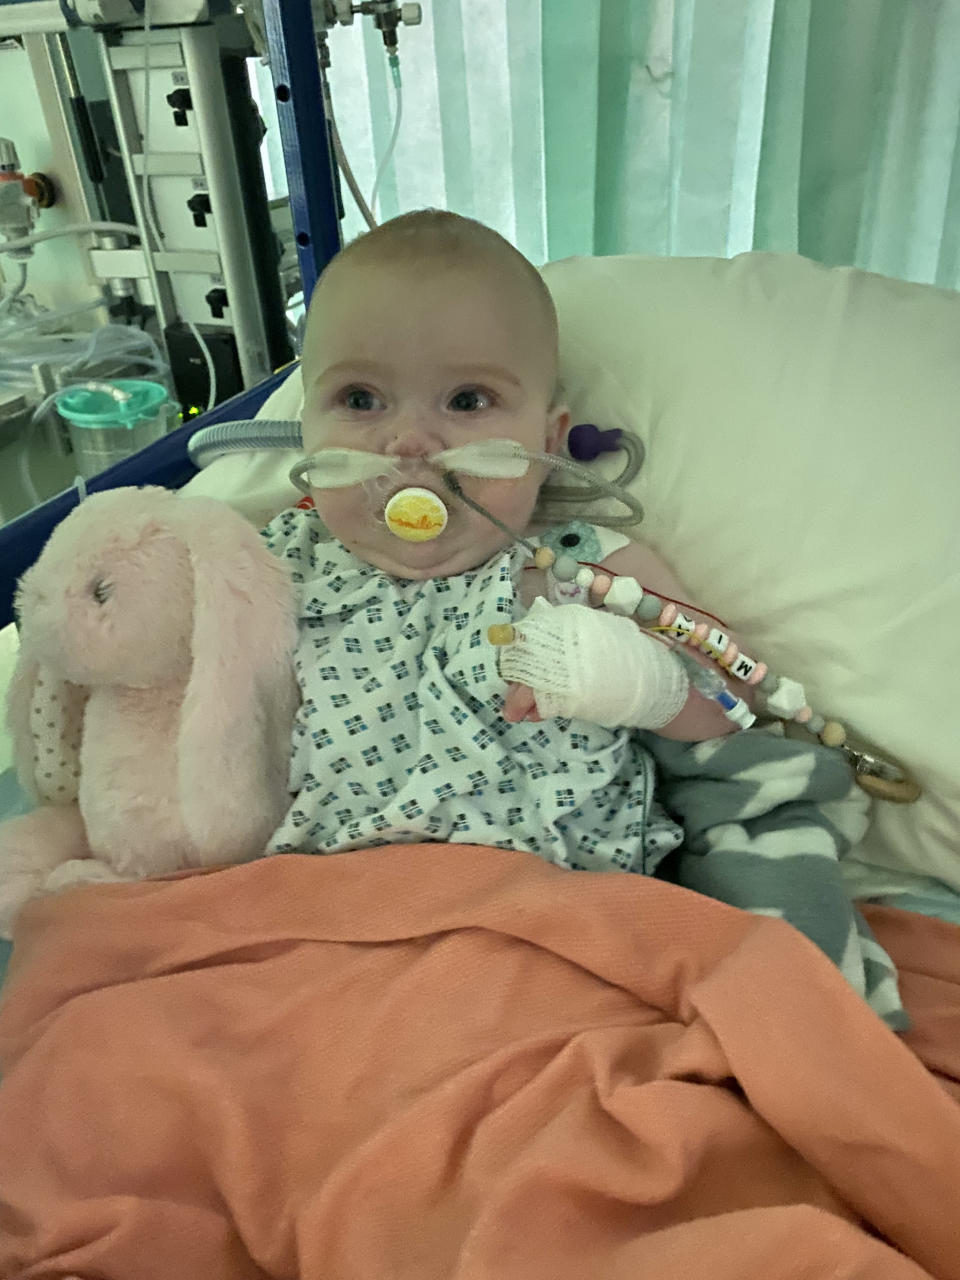 Mia Rogers was taken to hospital at just five weeks old after her parents noticed she was making a high-pitched wheezing sound while breathing. (Sophie Collins/Guy’s and St Thomas Hospital/SWNS)